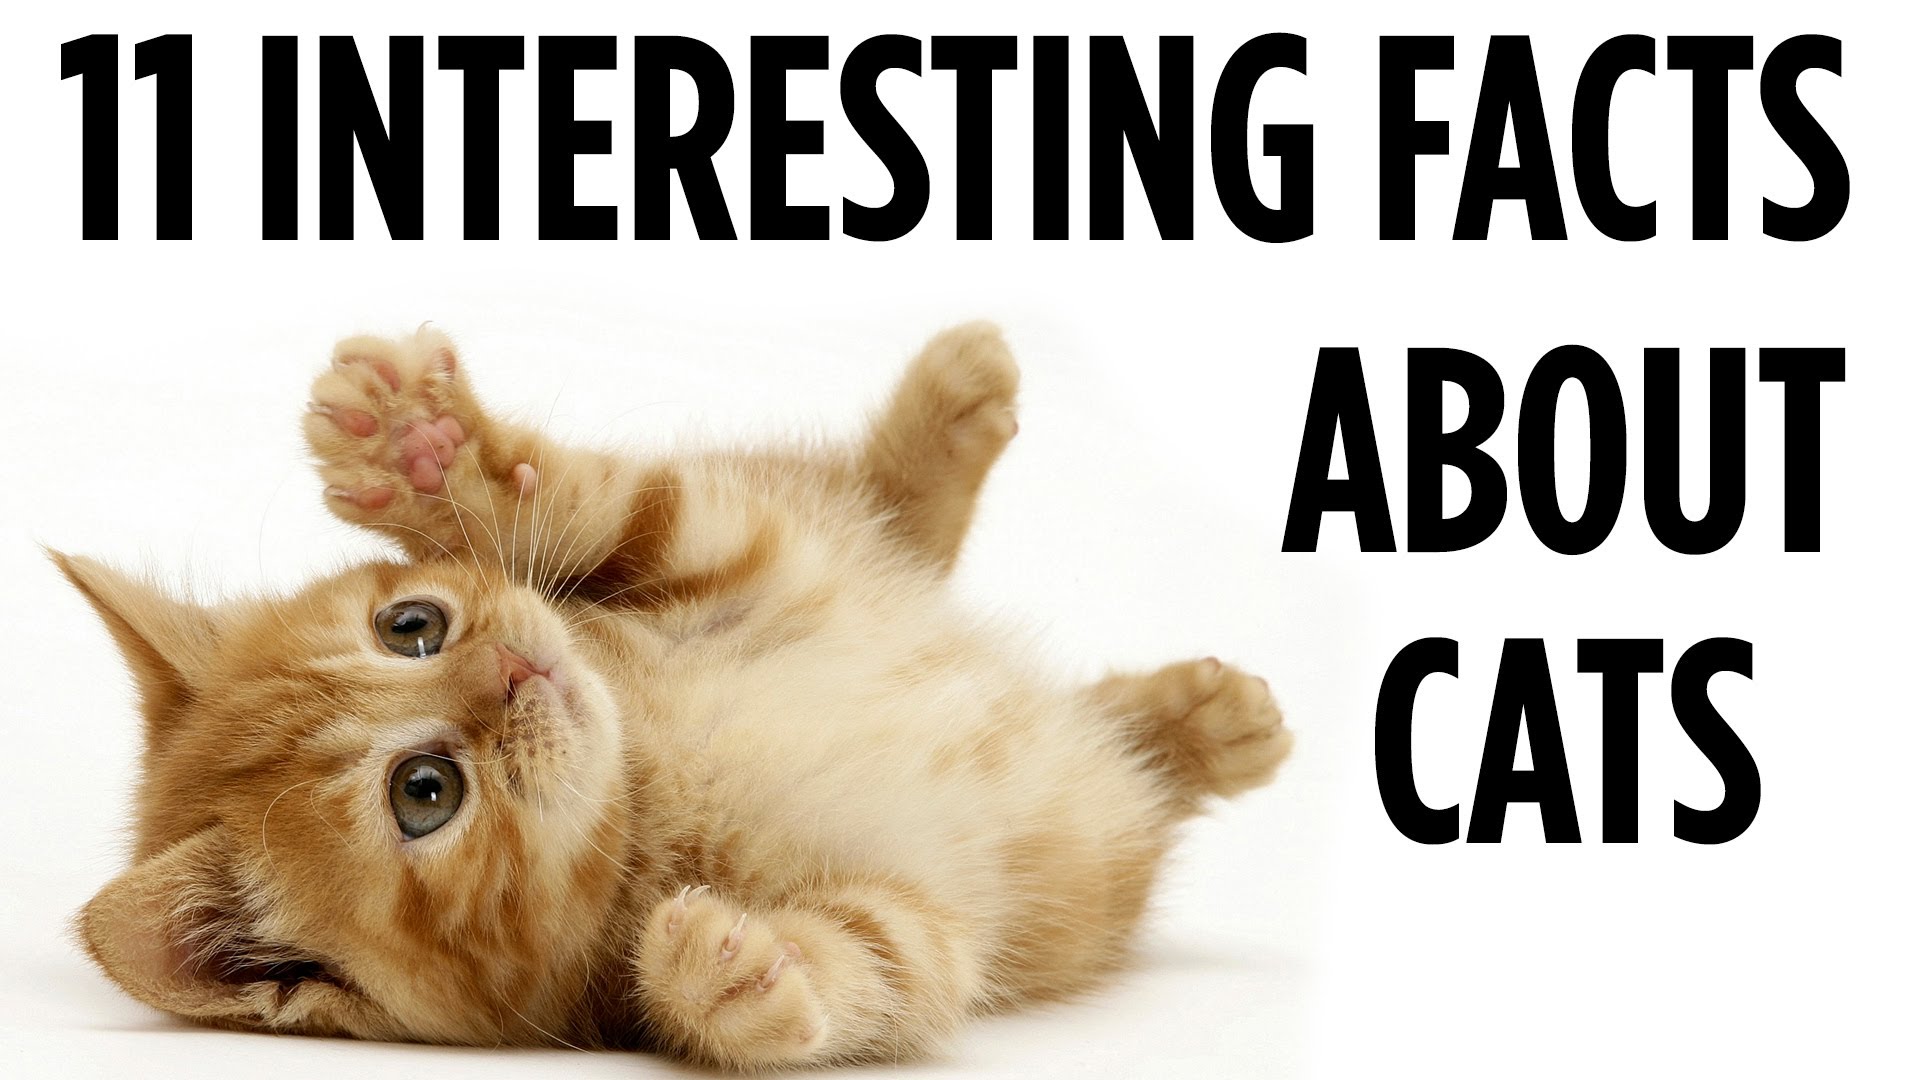 20 Top Pictures Fun Facts About Cats And Kittens : Fun Facts About Cats And Kittens